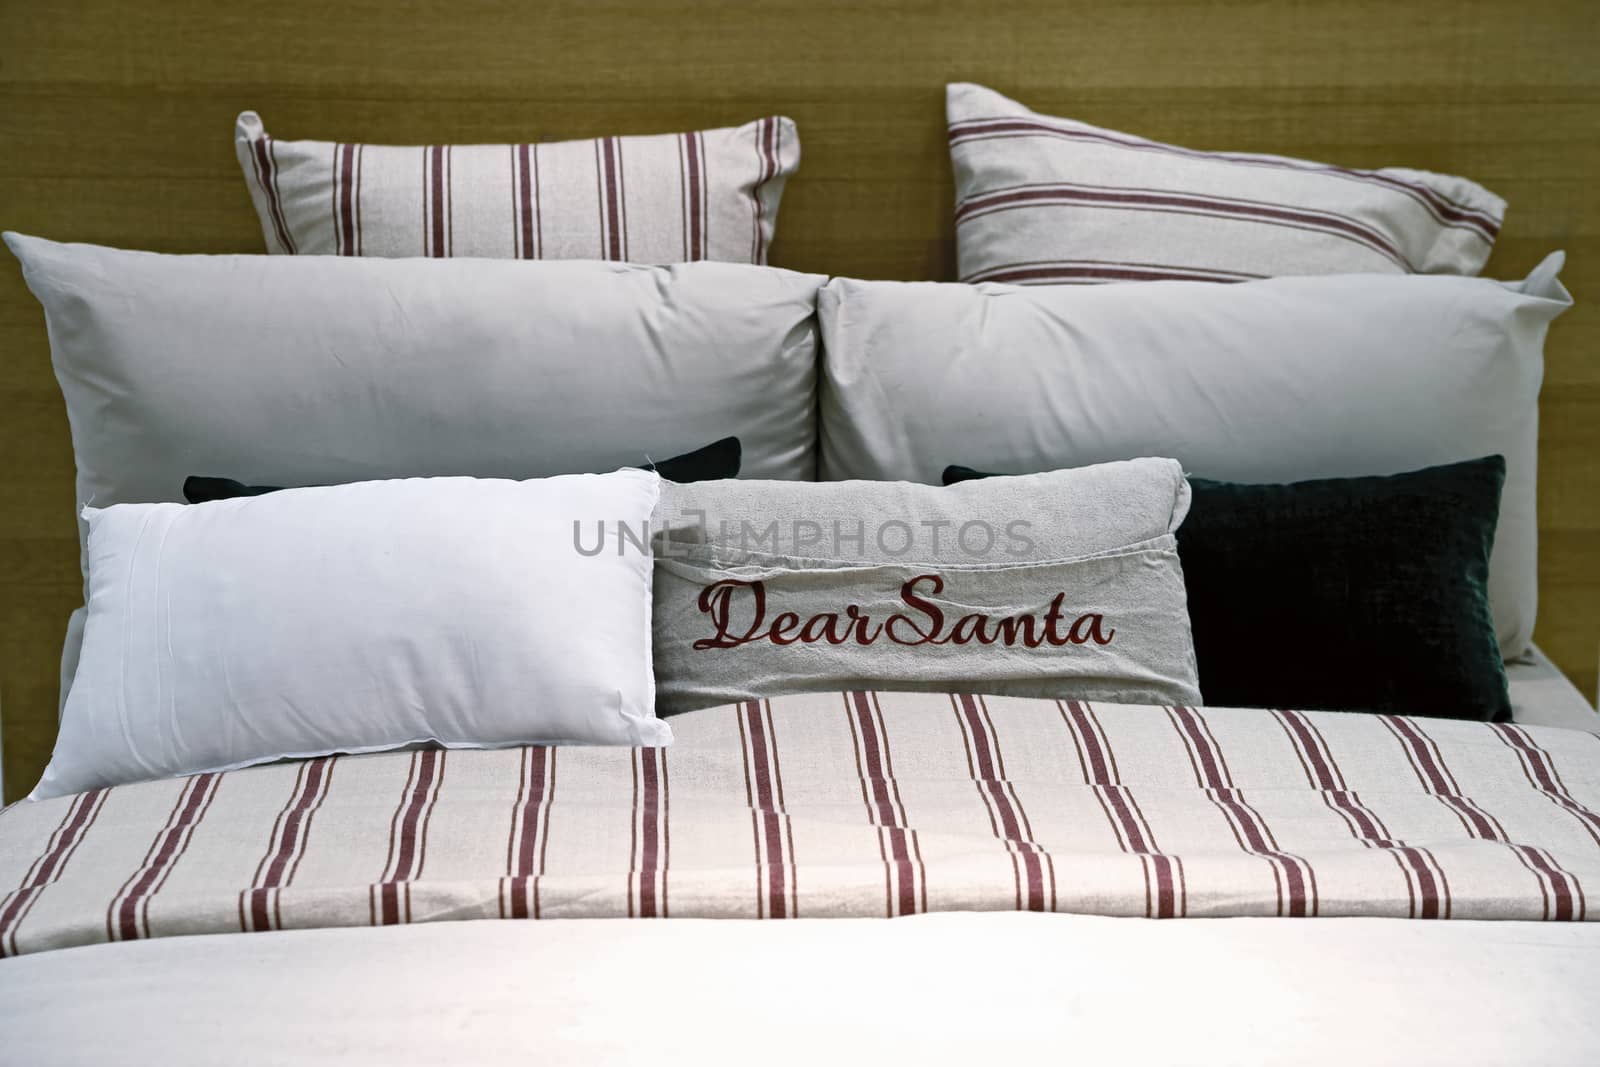 A cozy bed with soft pillows for rest during the Christmas holidays. Bed linen made of natural linen. Blurred background.